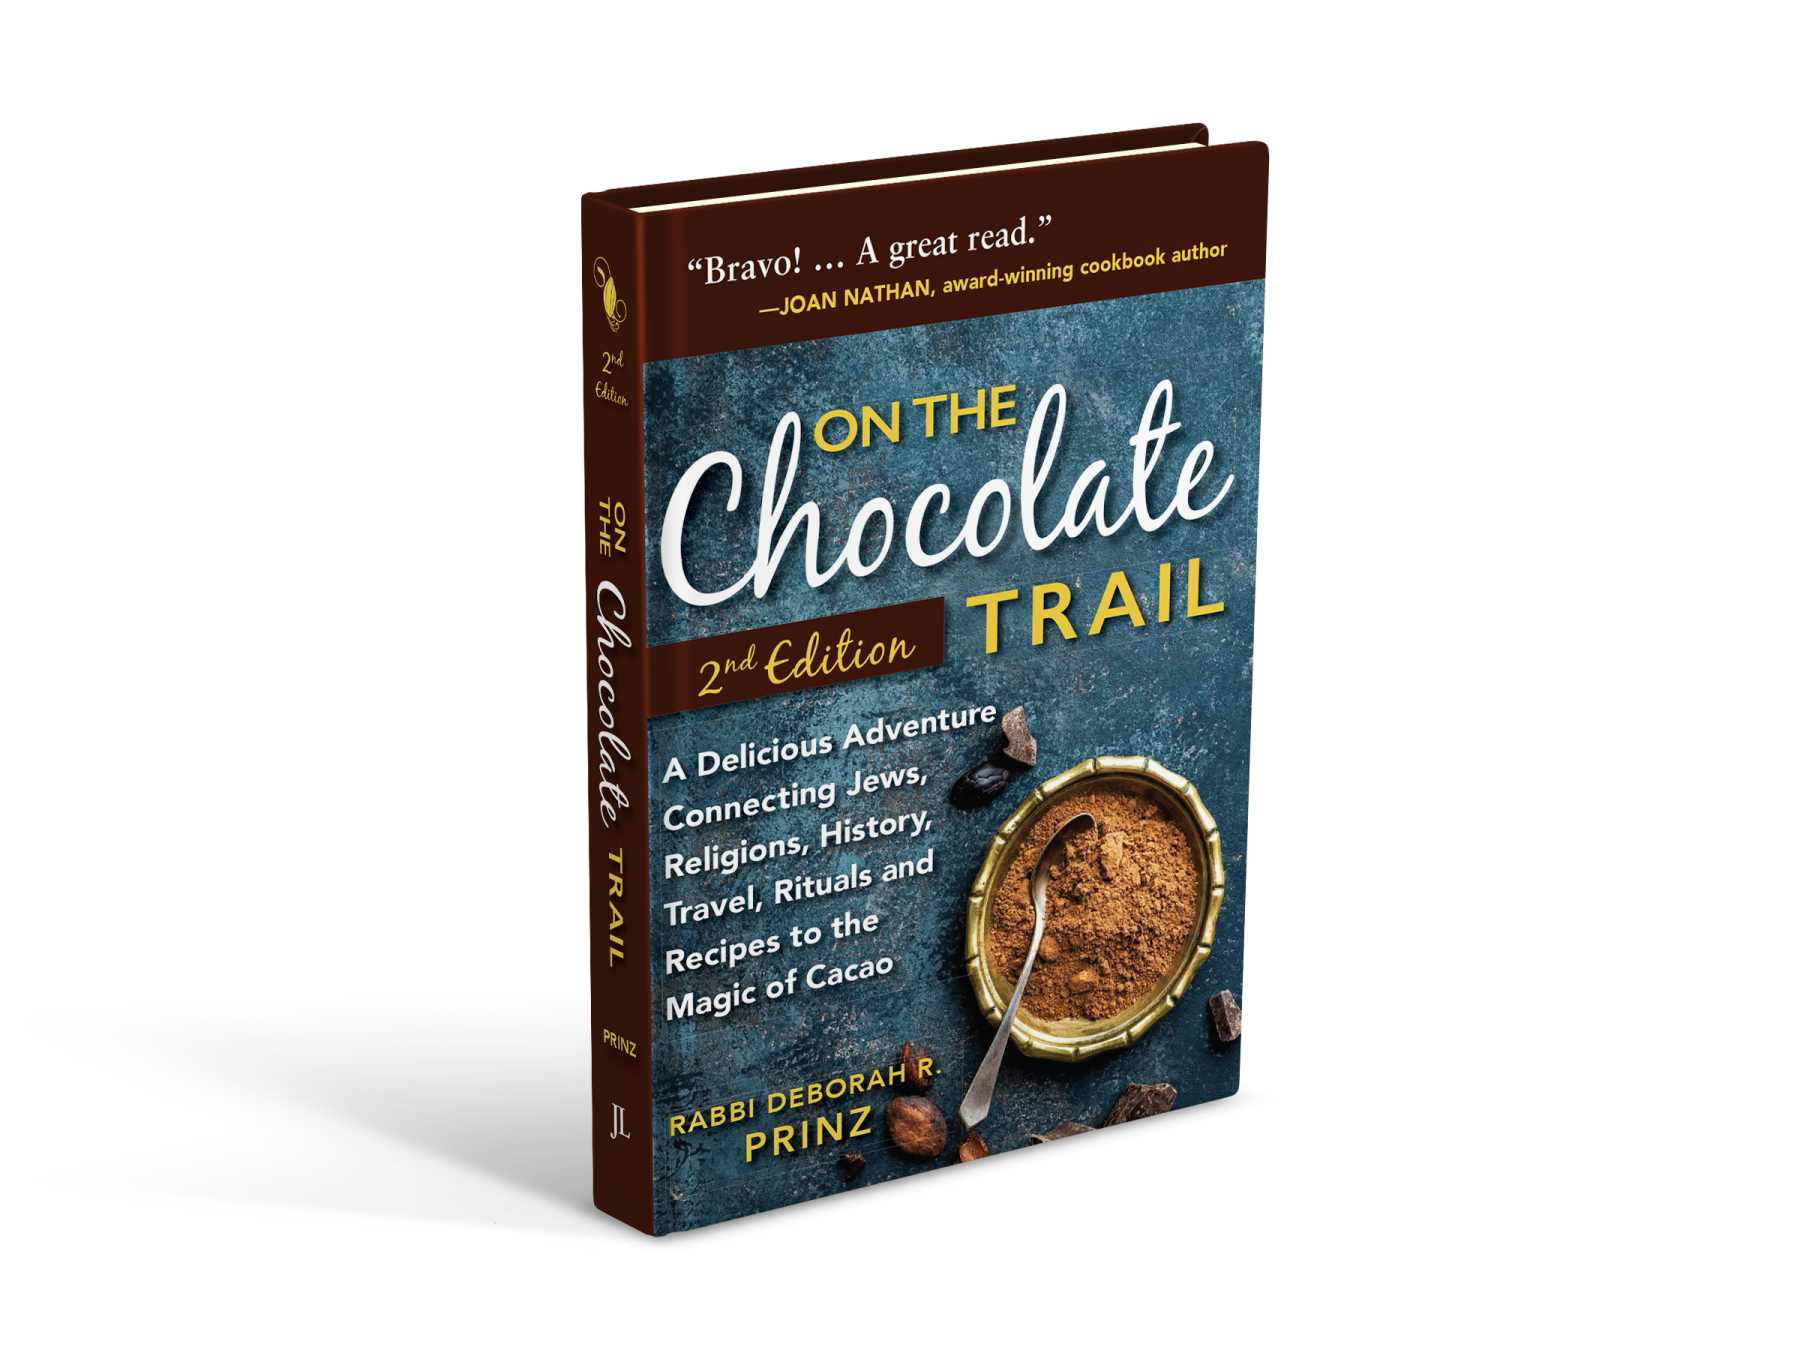 Hardcover mockup_#2 On the Chocolate Trail copy 2